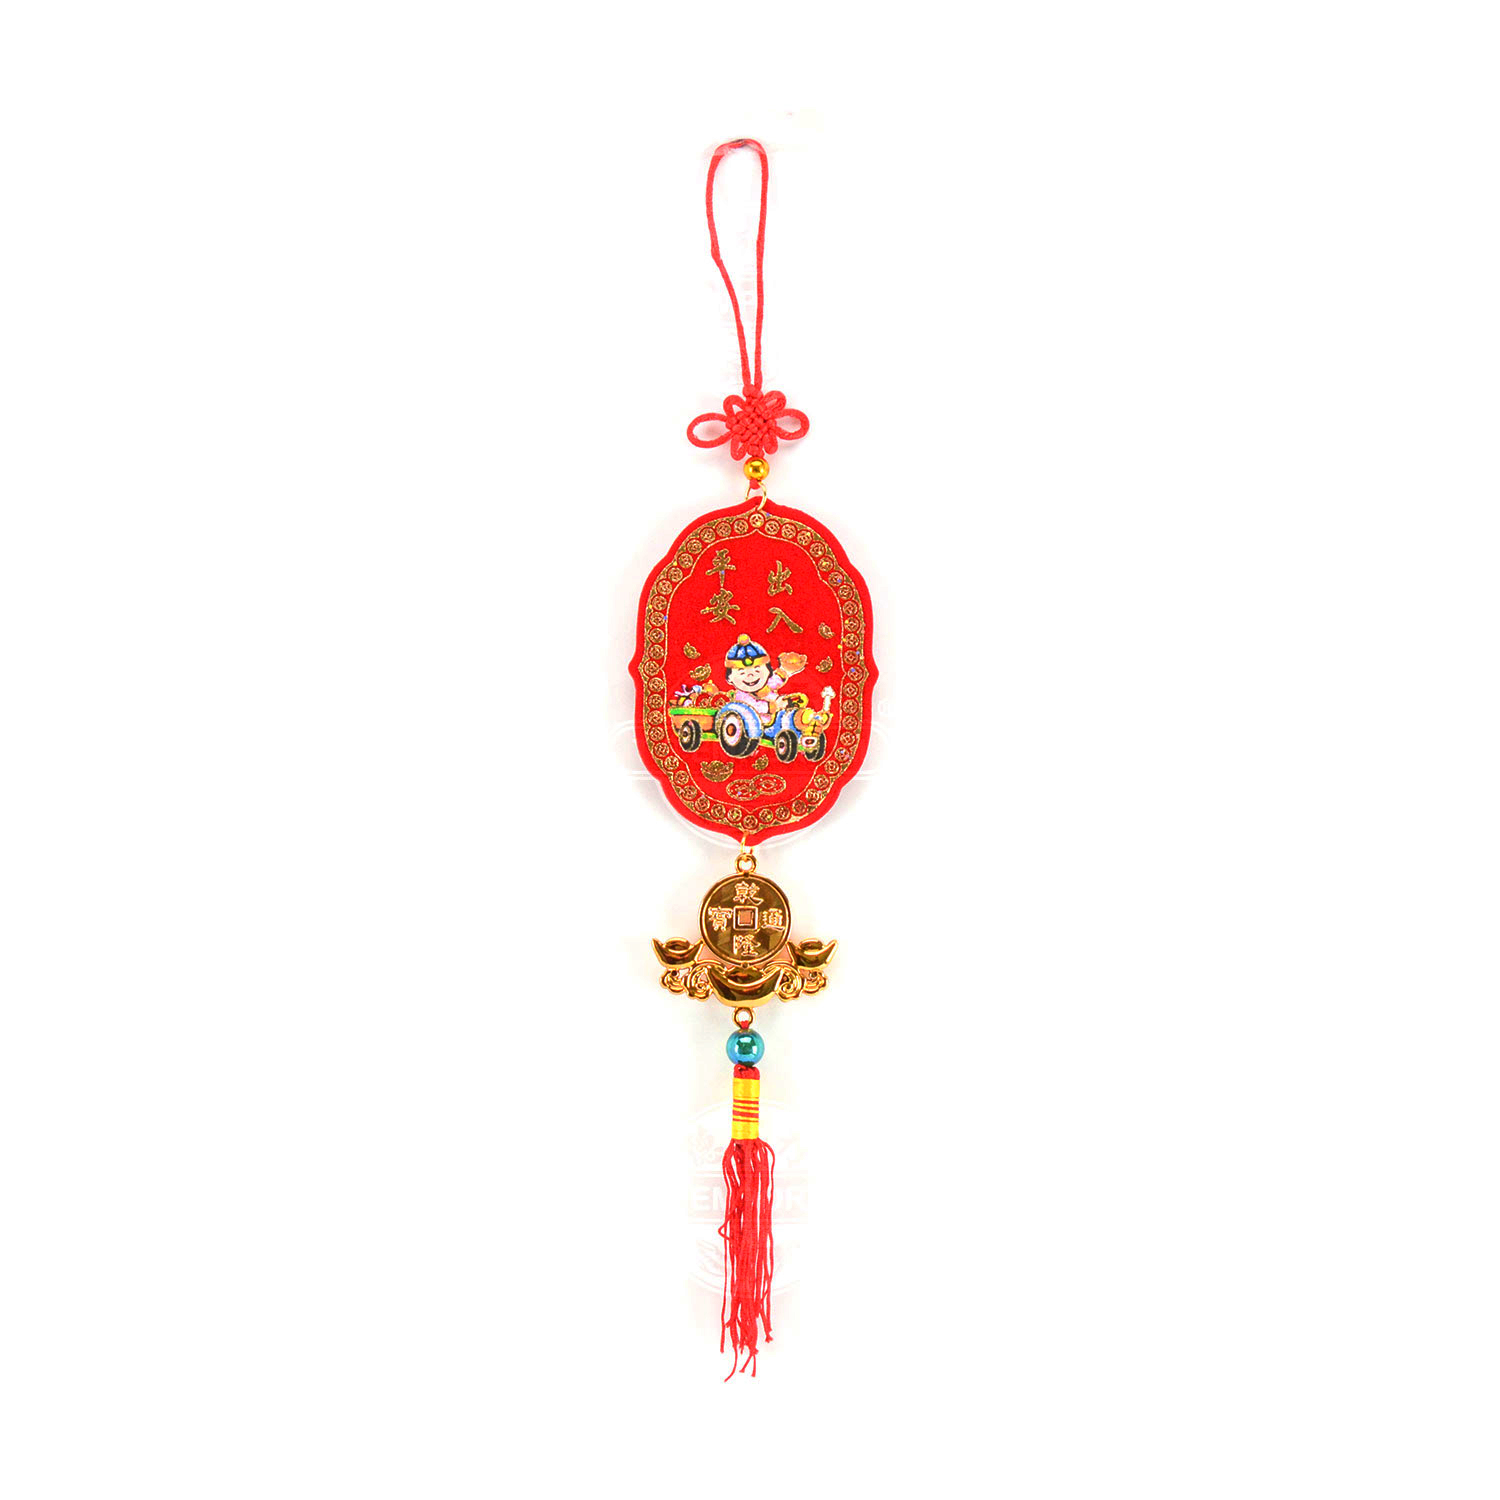 HY Chinese New Year Hanging Accessories Decoration 14